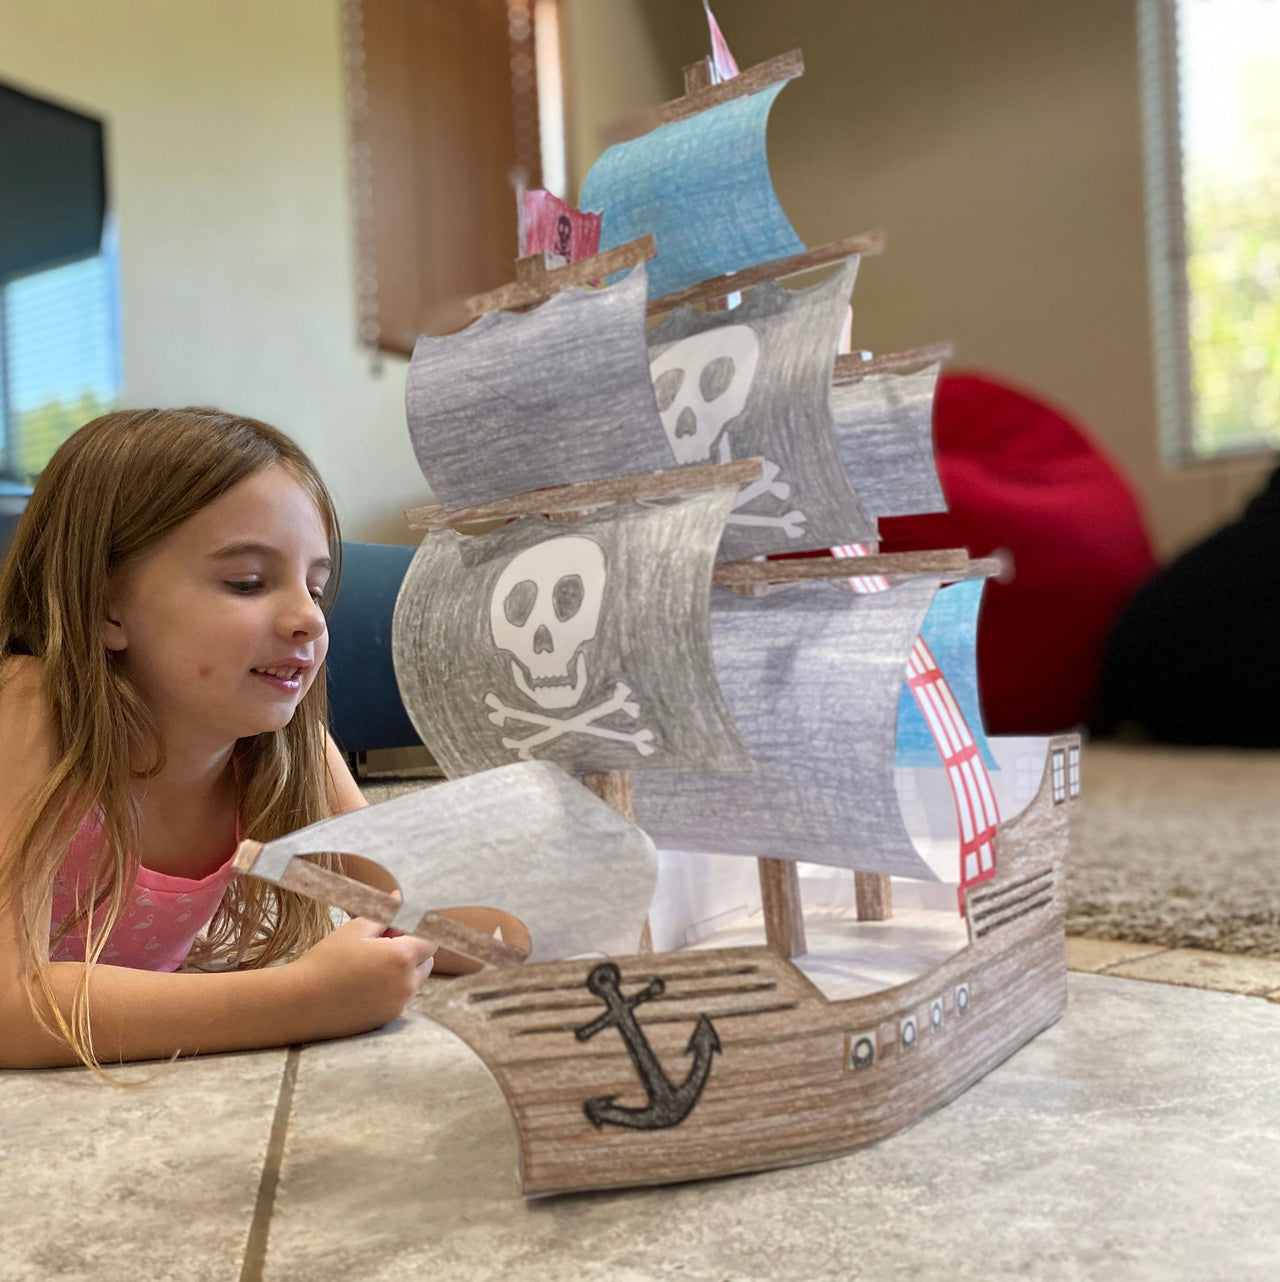 Pirate Ship 3D Coloring